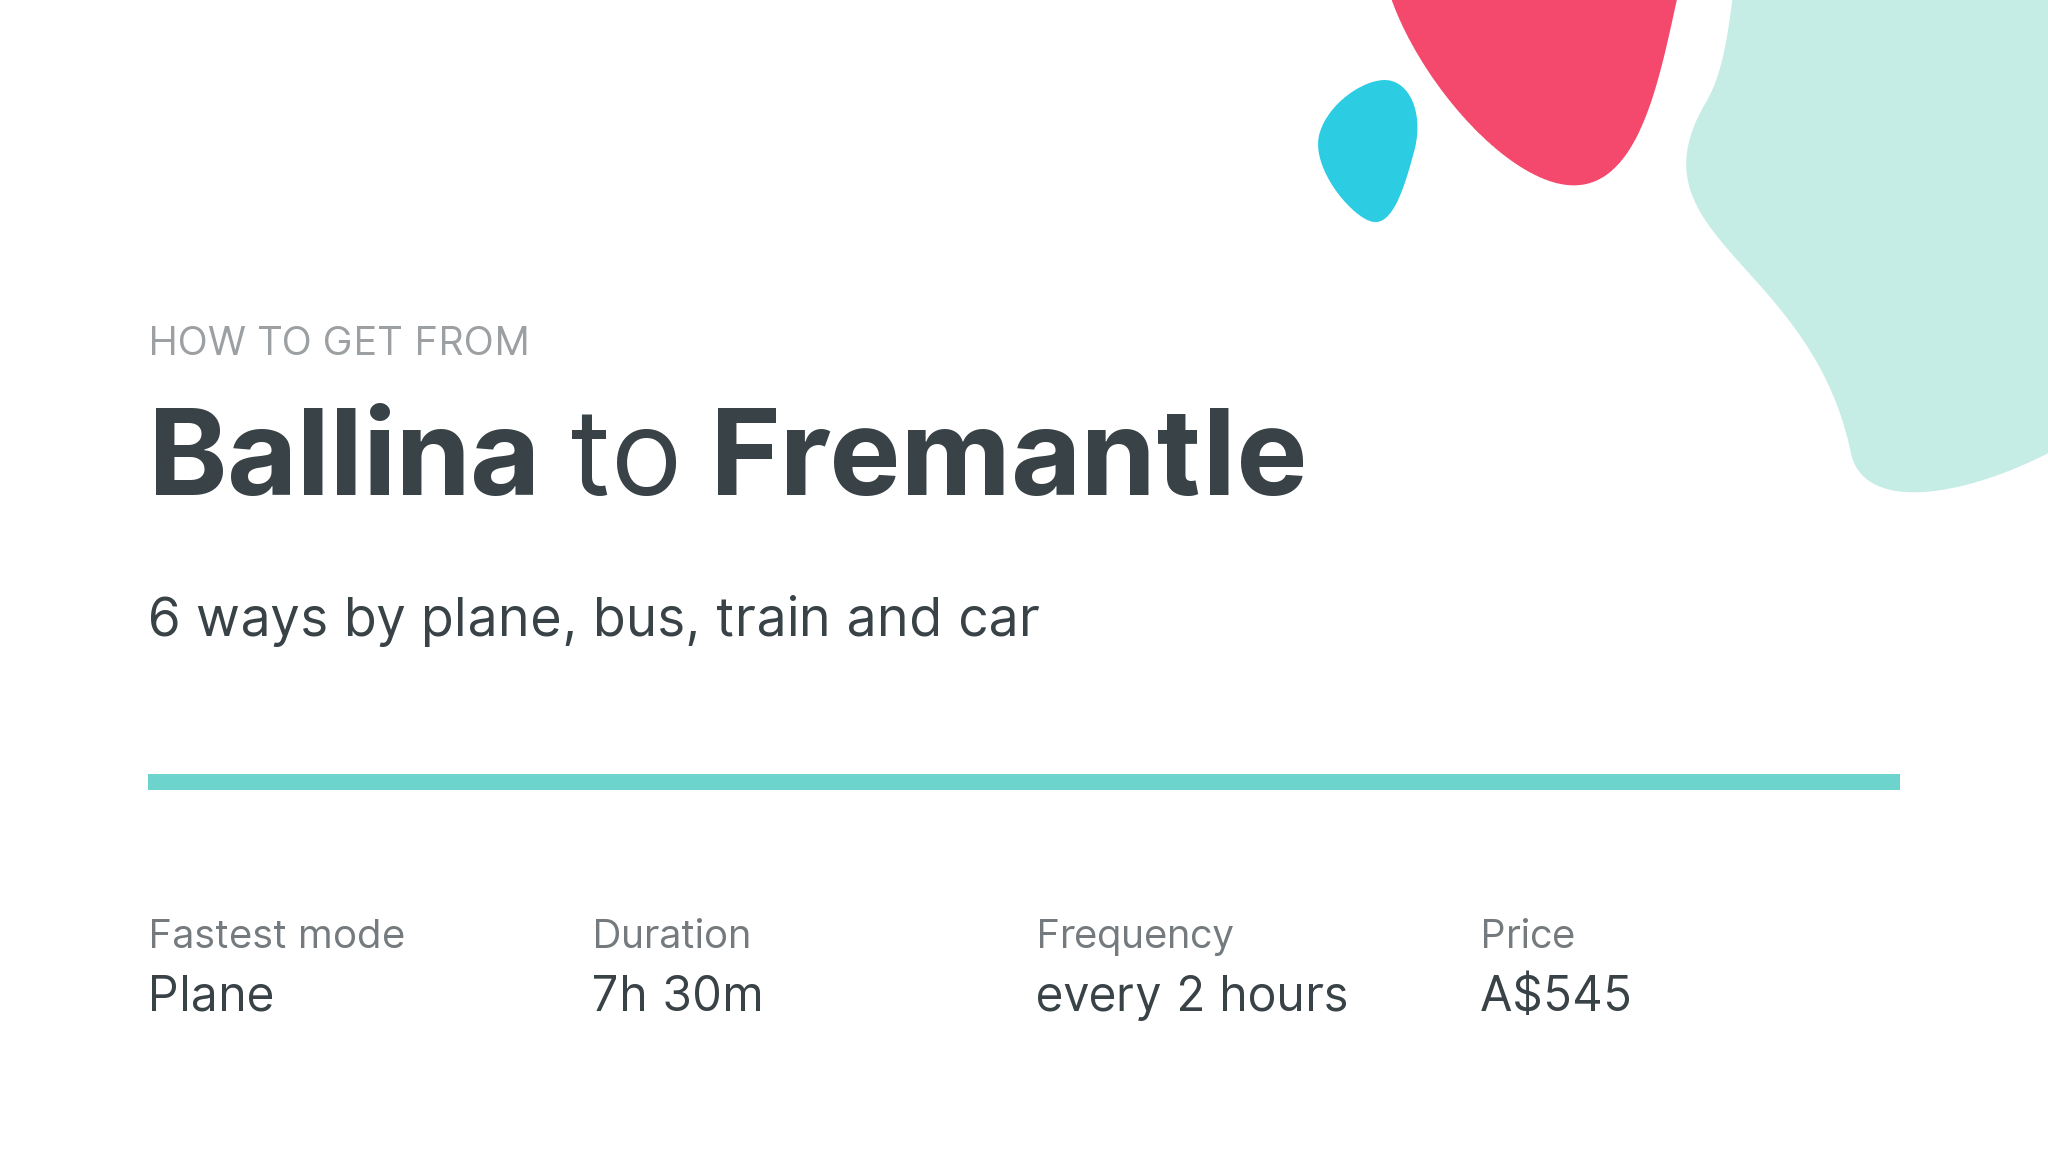 How do I get from Ballina to Fremantle